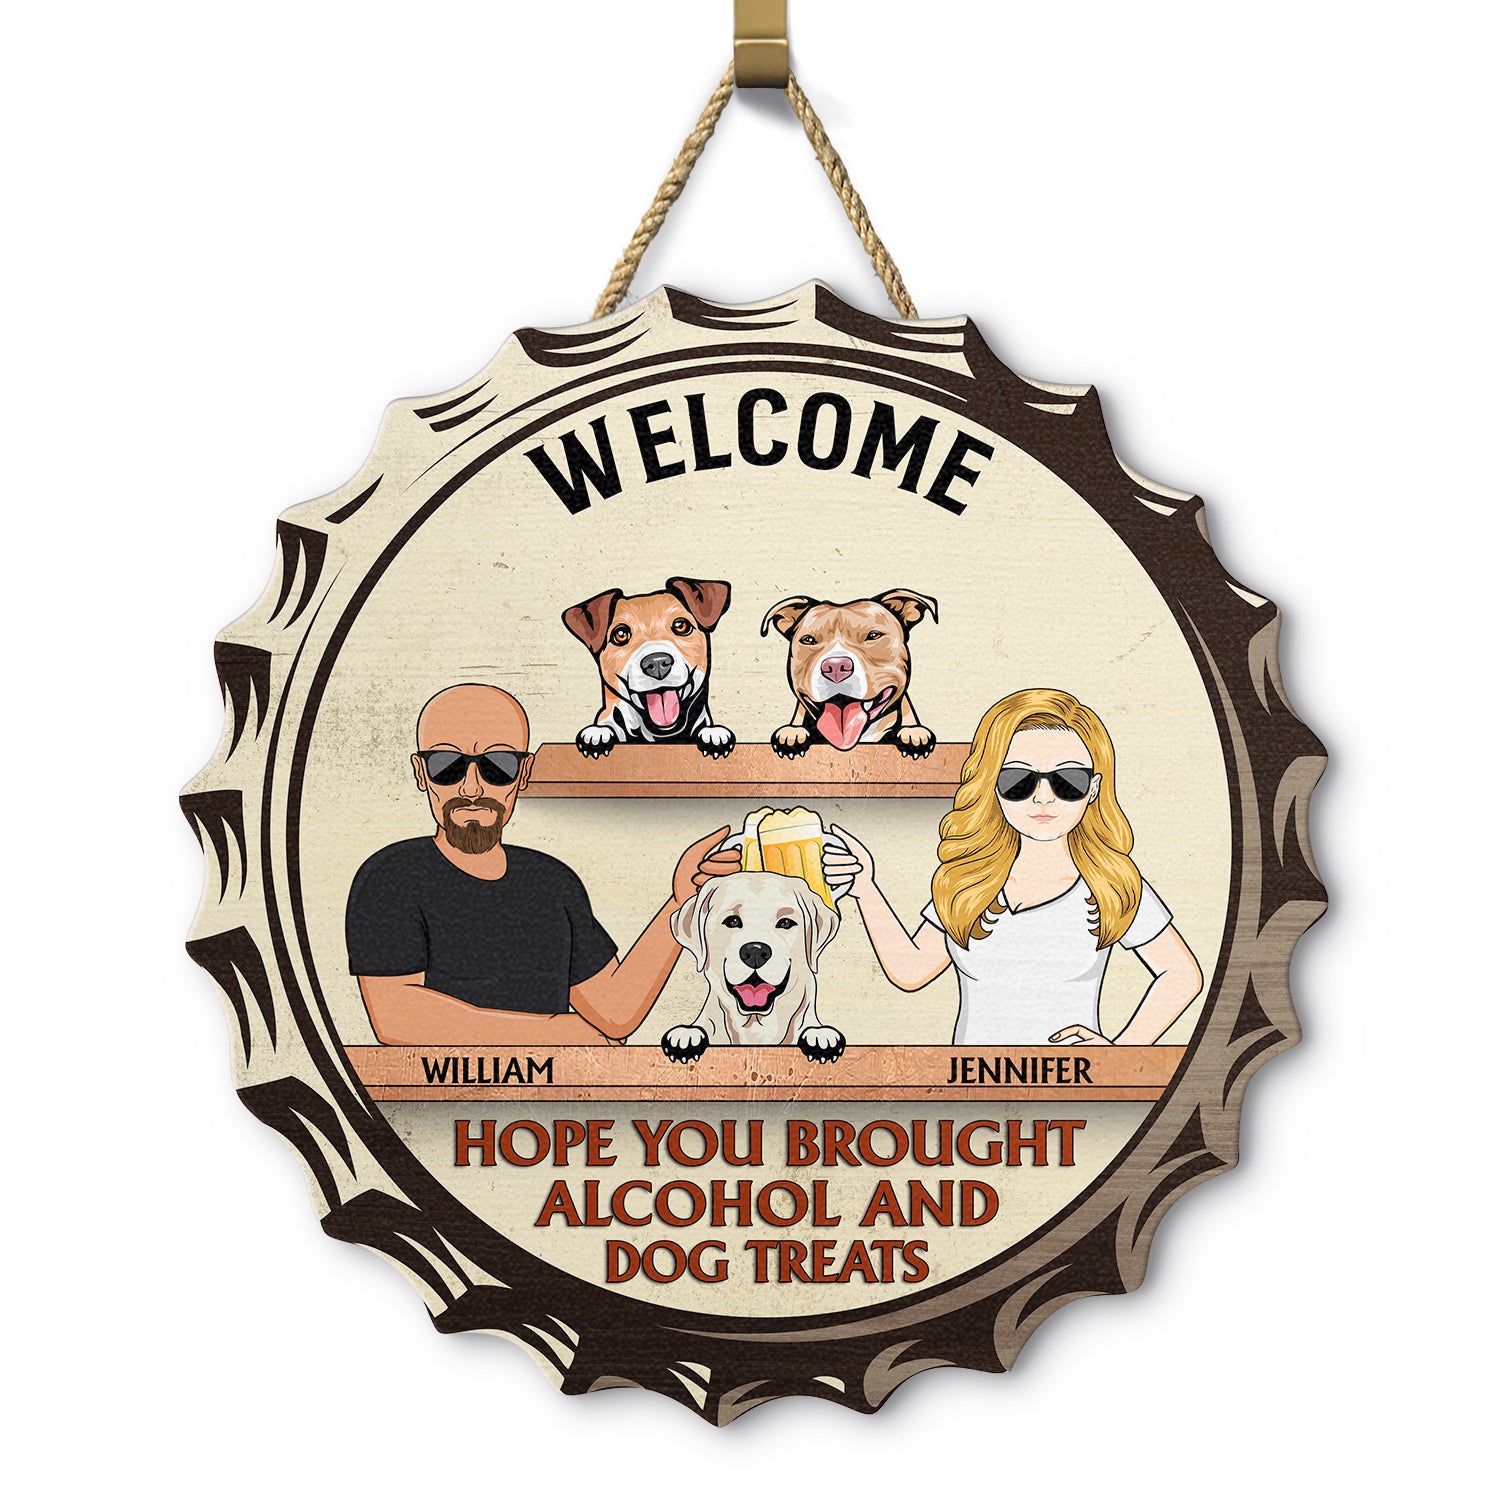 Welcome Hope You Brought Alcohol - Birthday, Loving Home Decor Gift For Dog Mom, Dad, Pet Owner - Personalized Custom Shaped Wood Sign